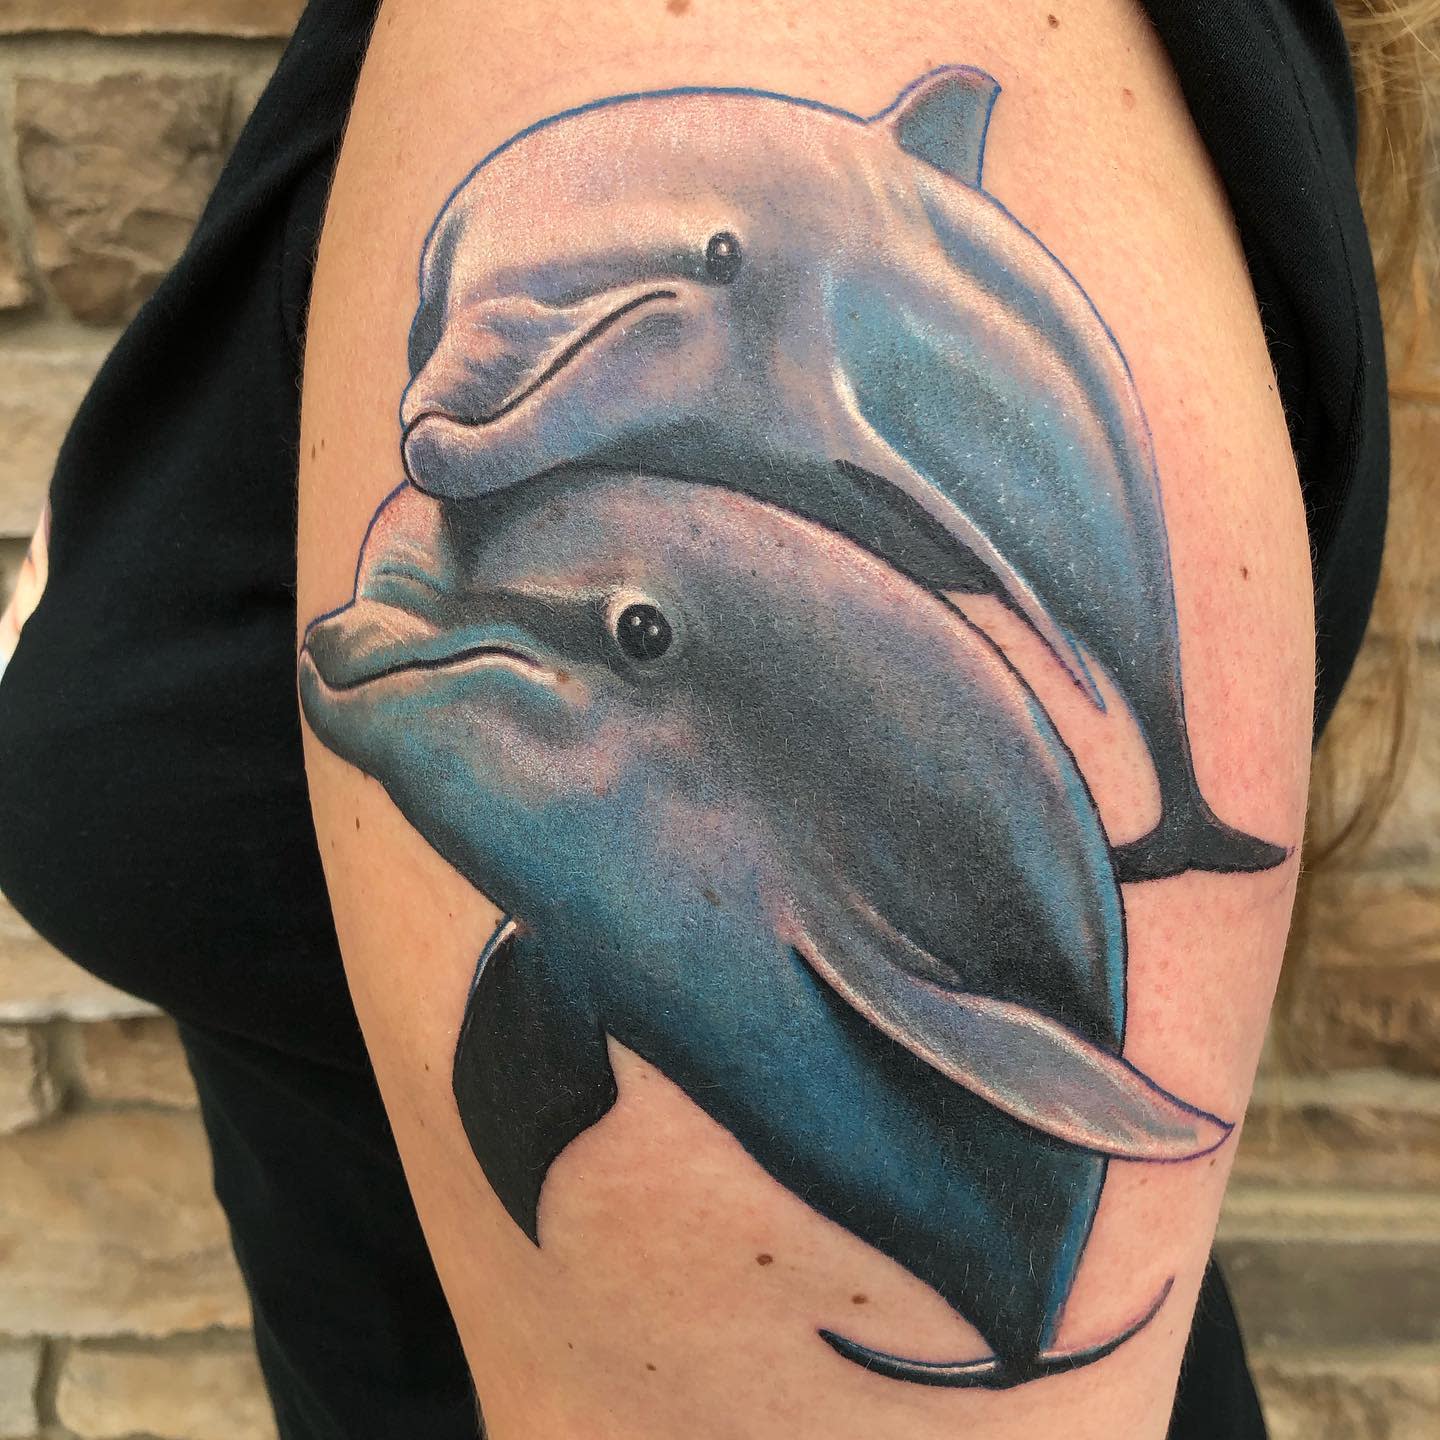 3675 Dolphin Tattoo Images Stock Photos  Vectors  Shutterstock